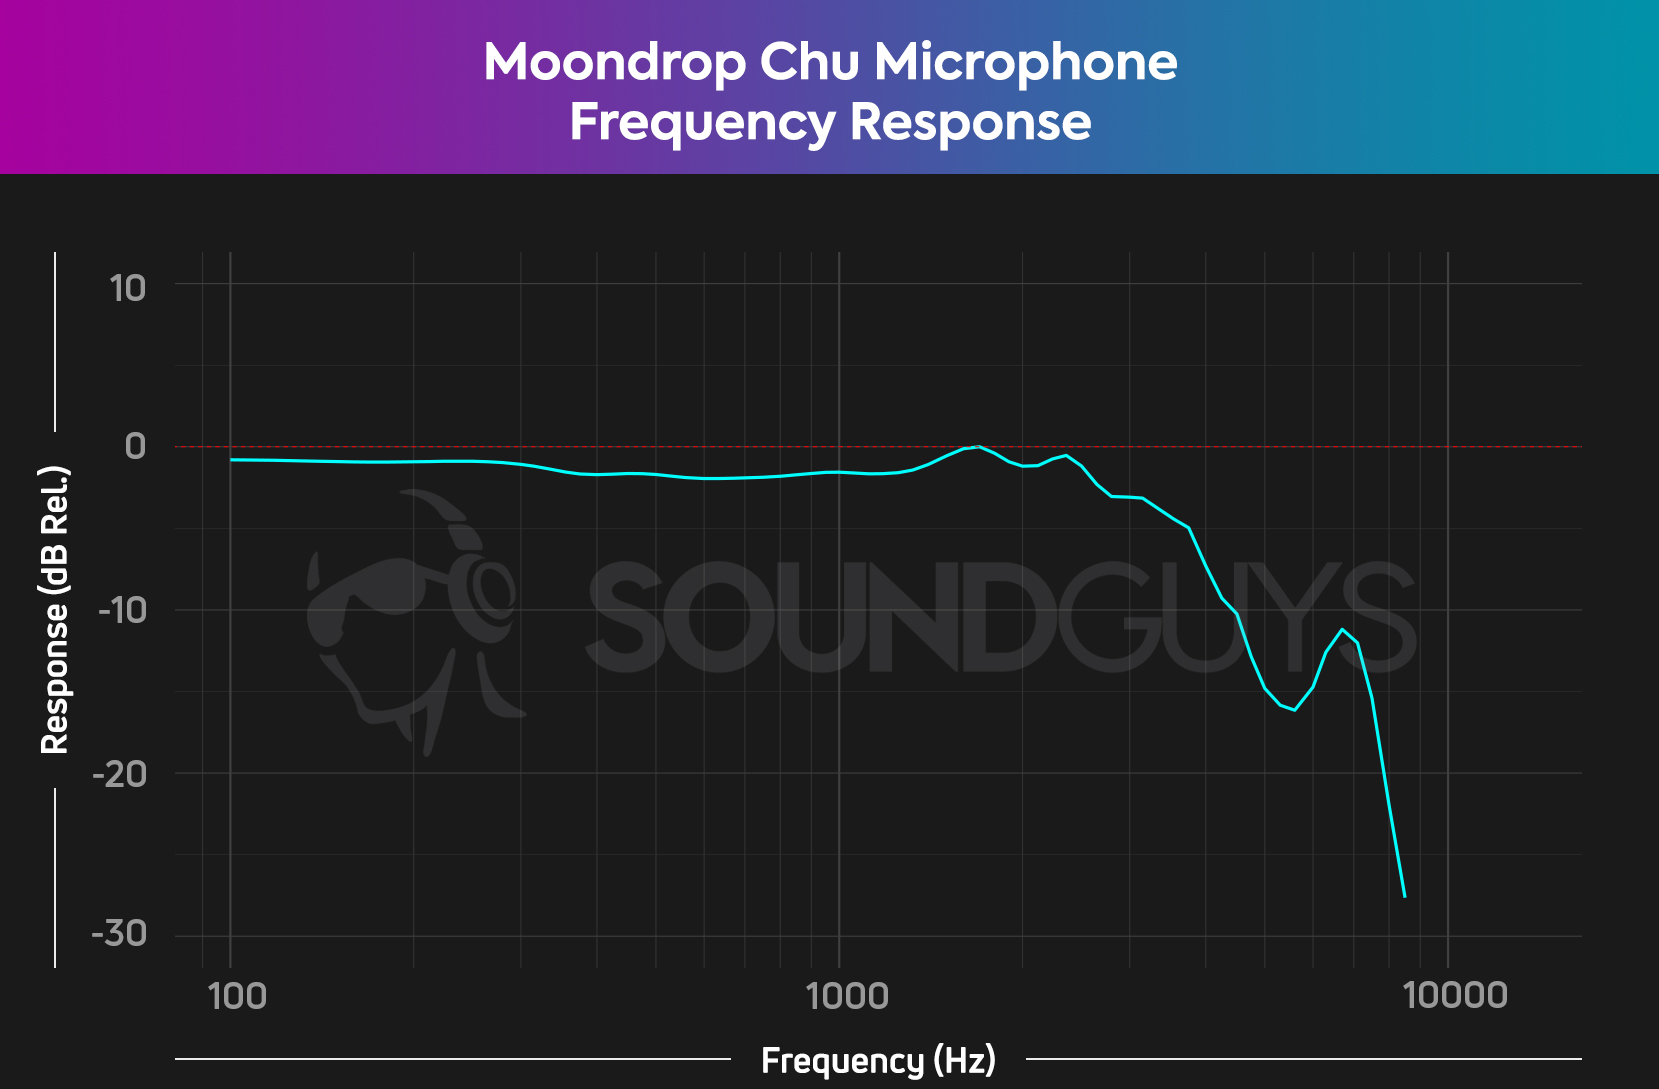 The frequency response of the microphone on the Moondrop Chu shows a mostly accurate sound until volume tapers off above 3kHz.